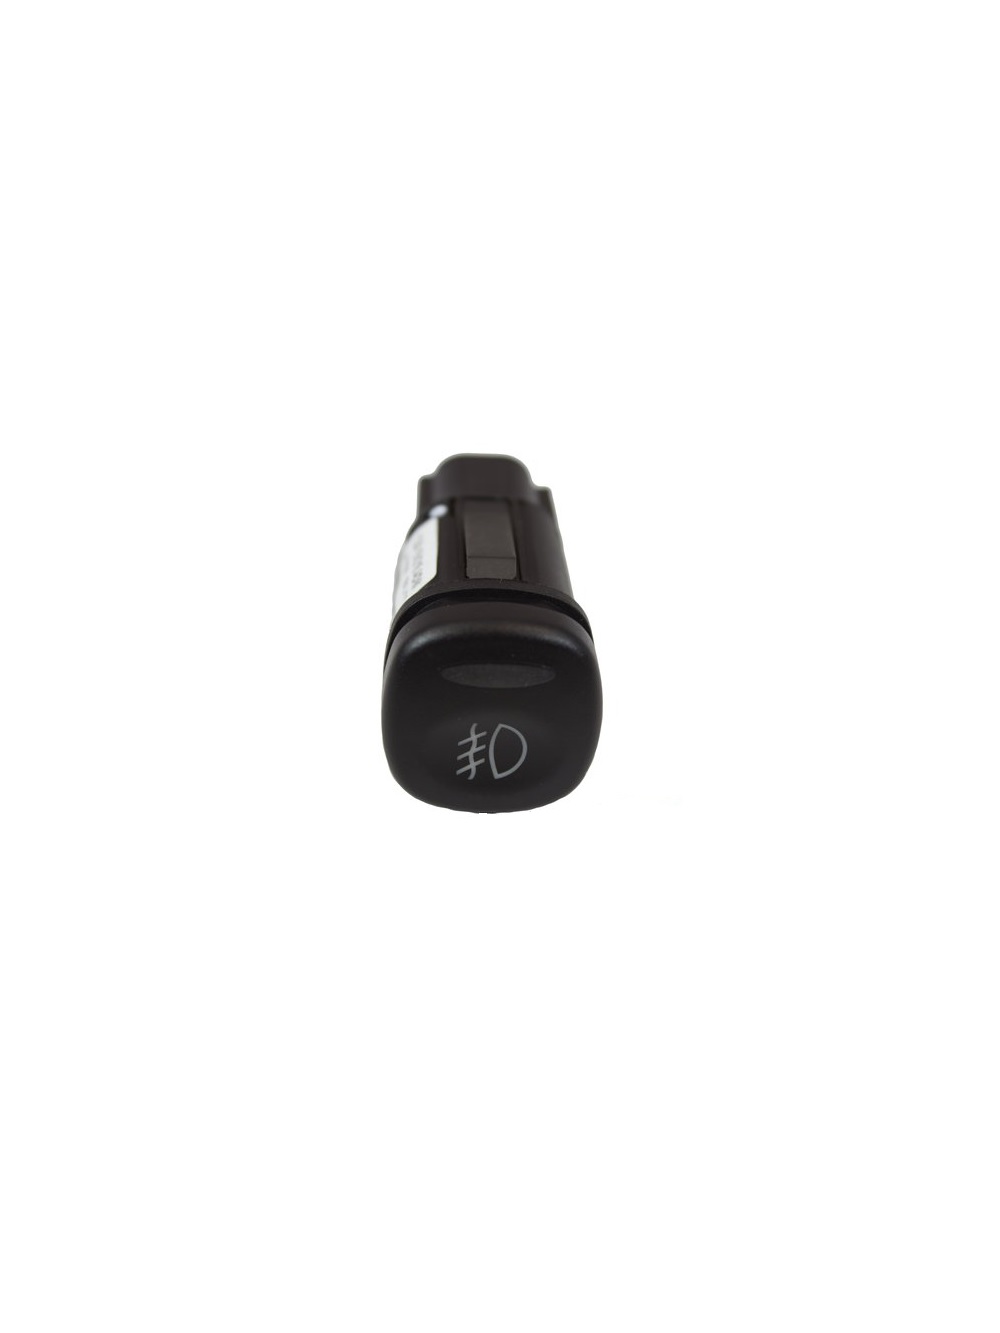 Fog Lamps Switch